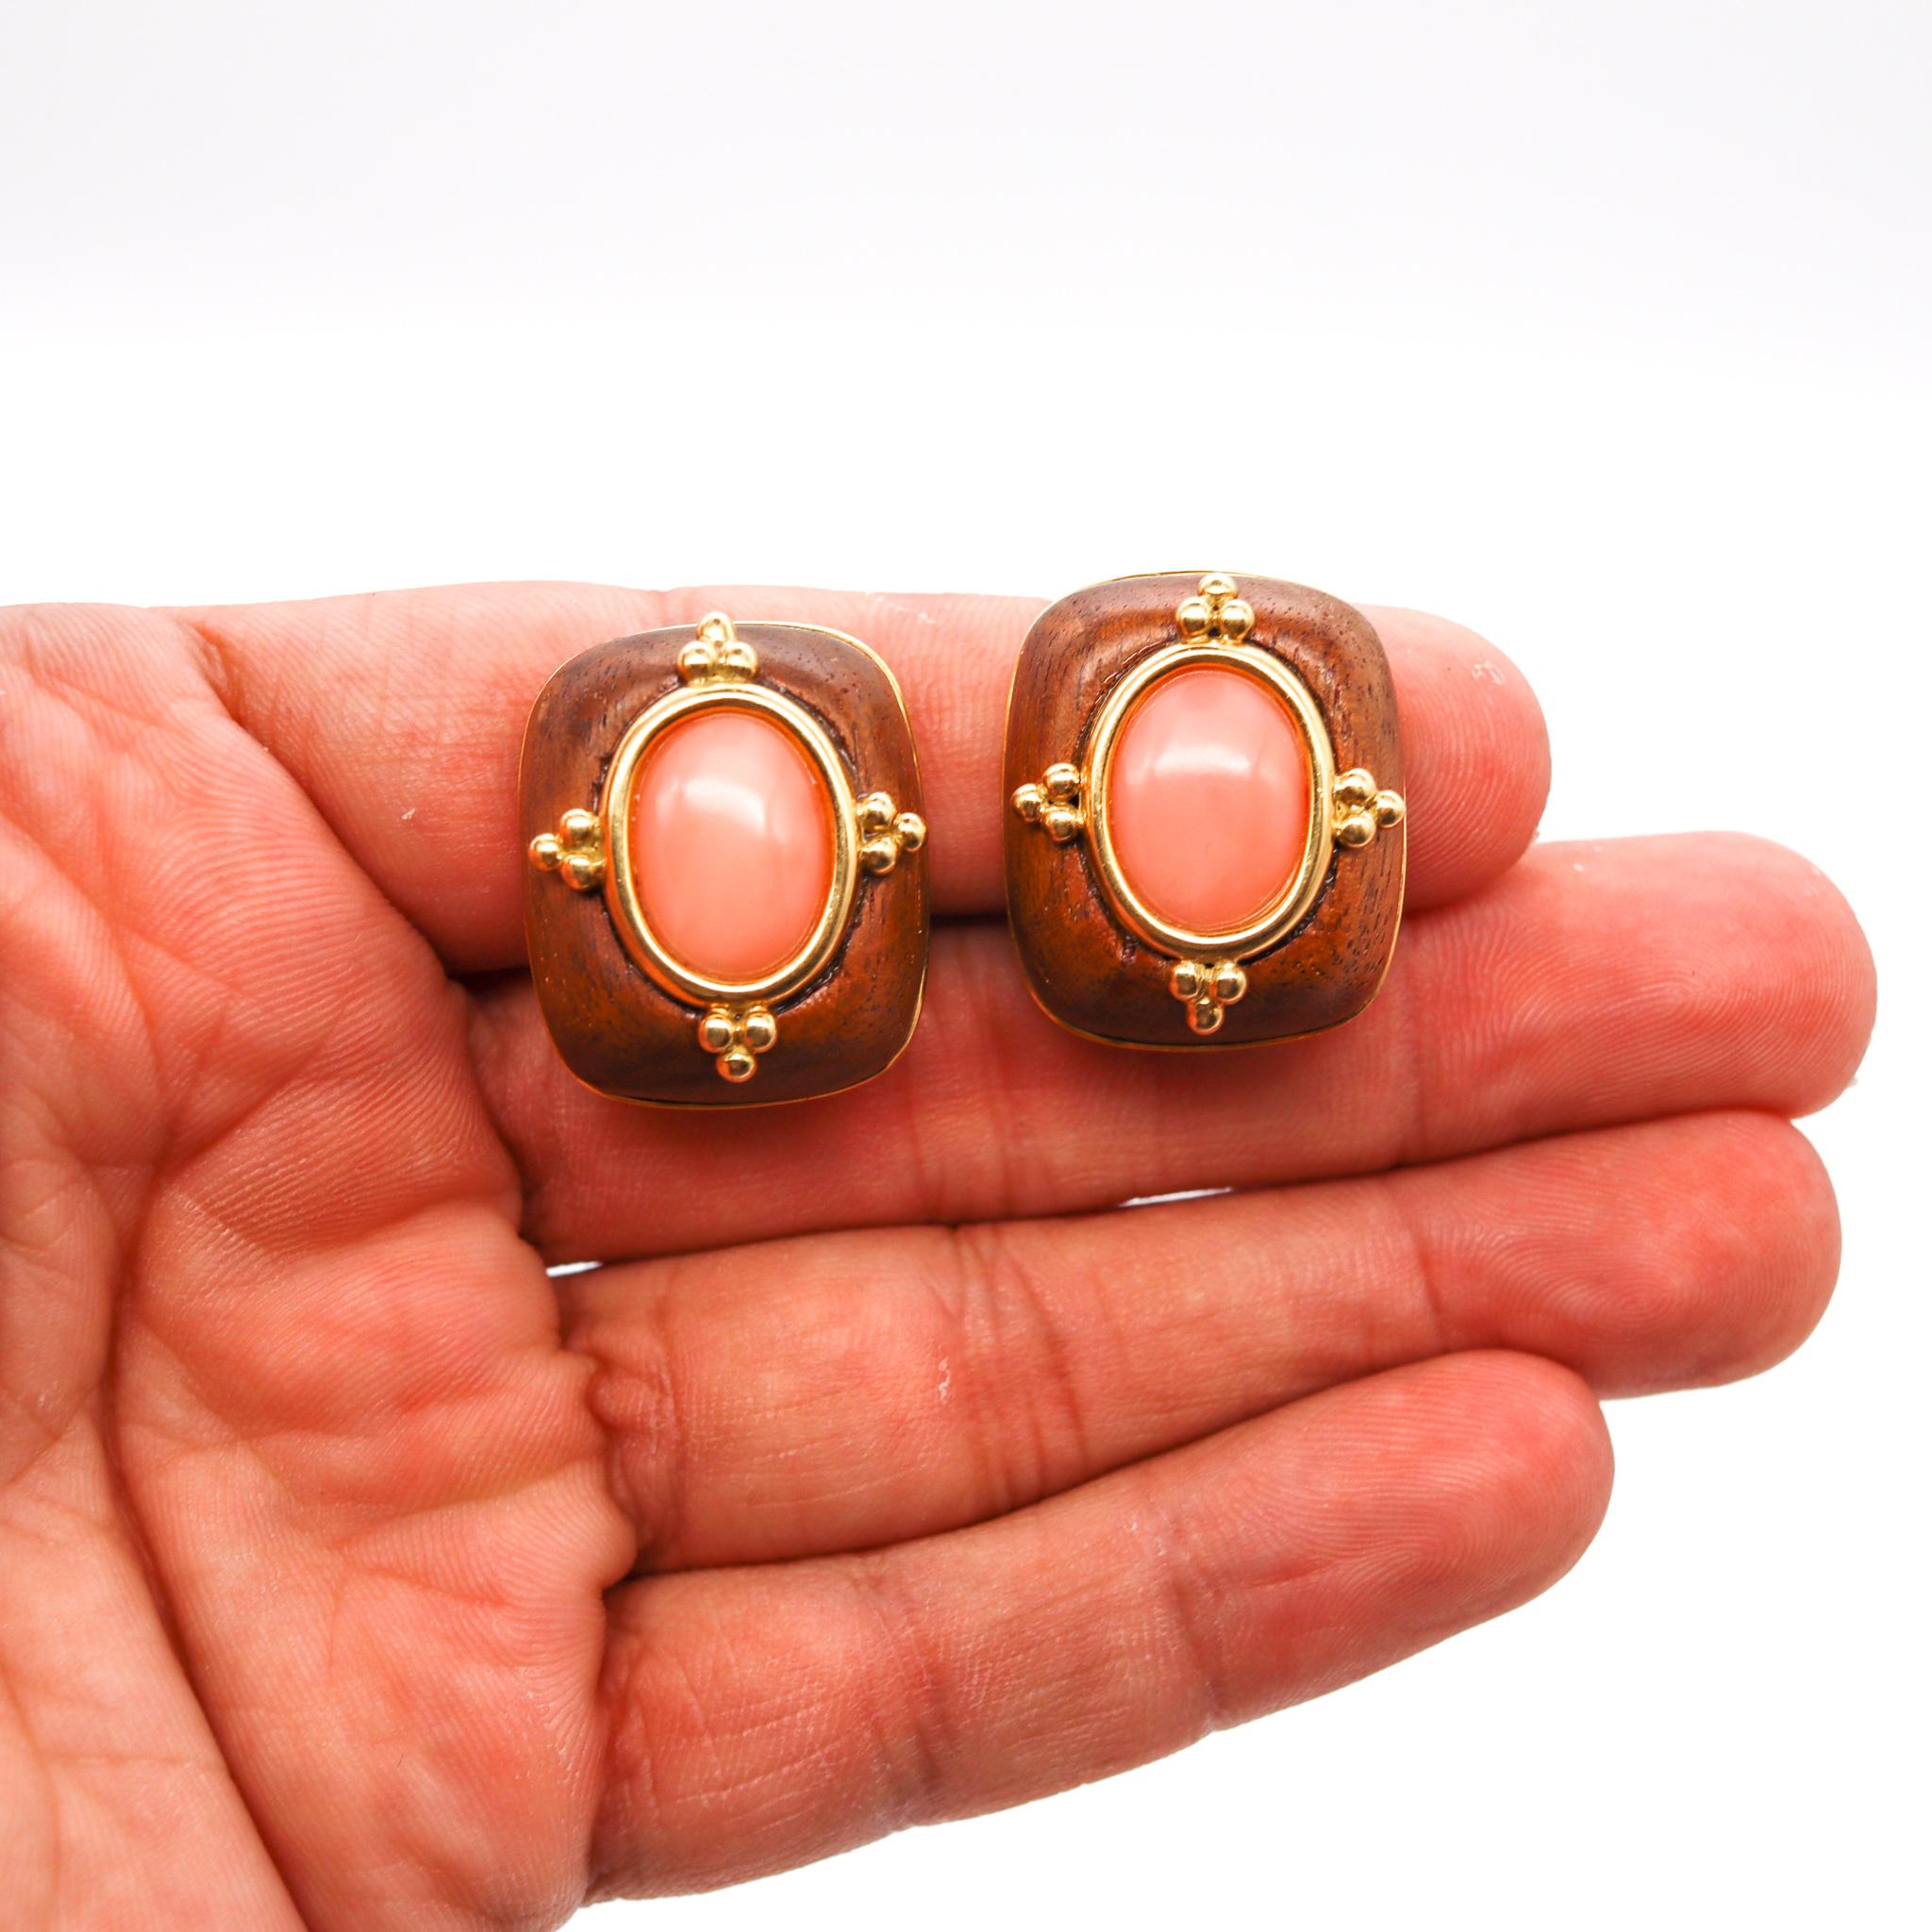 Clip Earrings designed by Seaman Schepps for Trianon.

Stunning colorful pair of clips-earrings, created by the American jewelry firm of Trianon-Seaman Schepps. These pieces has been crafted in solid yellow gold of 18 karats, with high polished